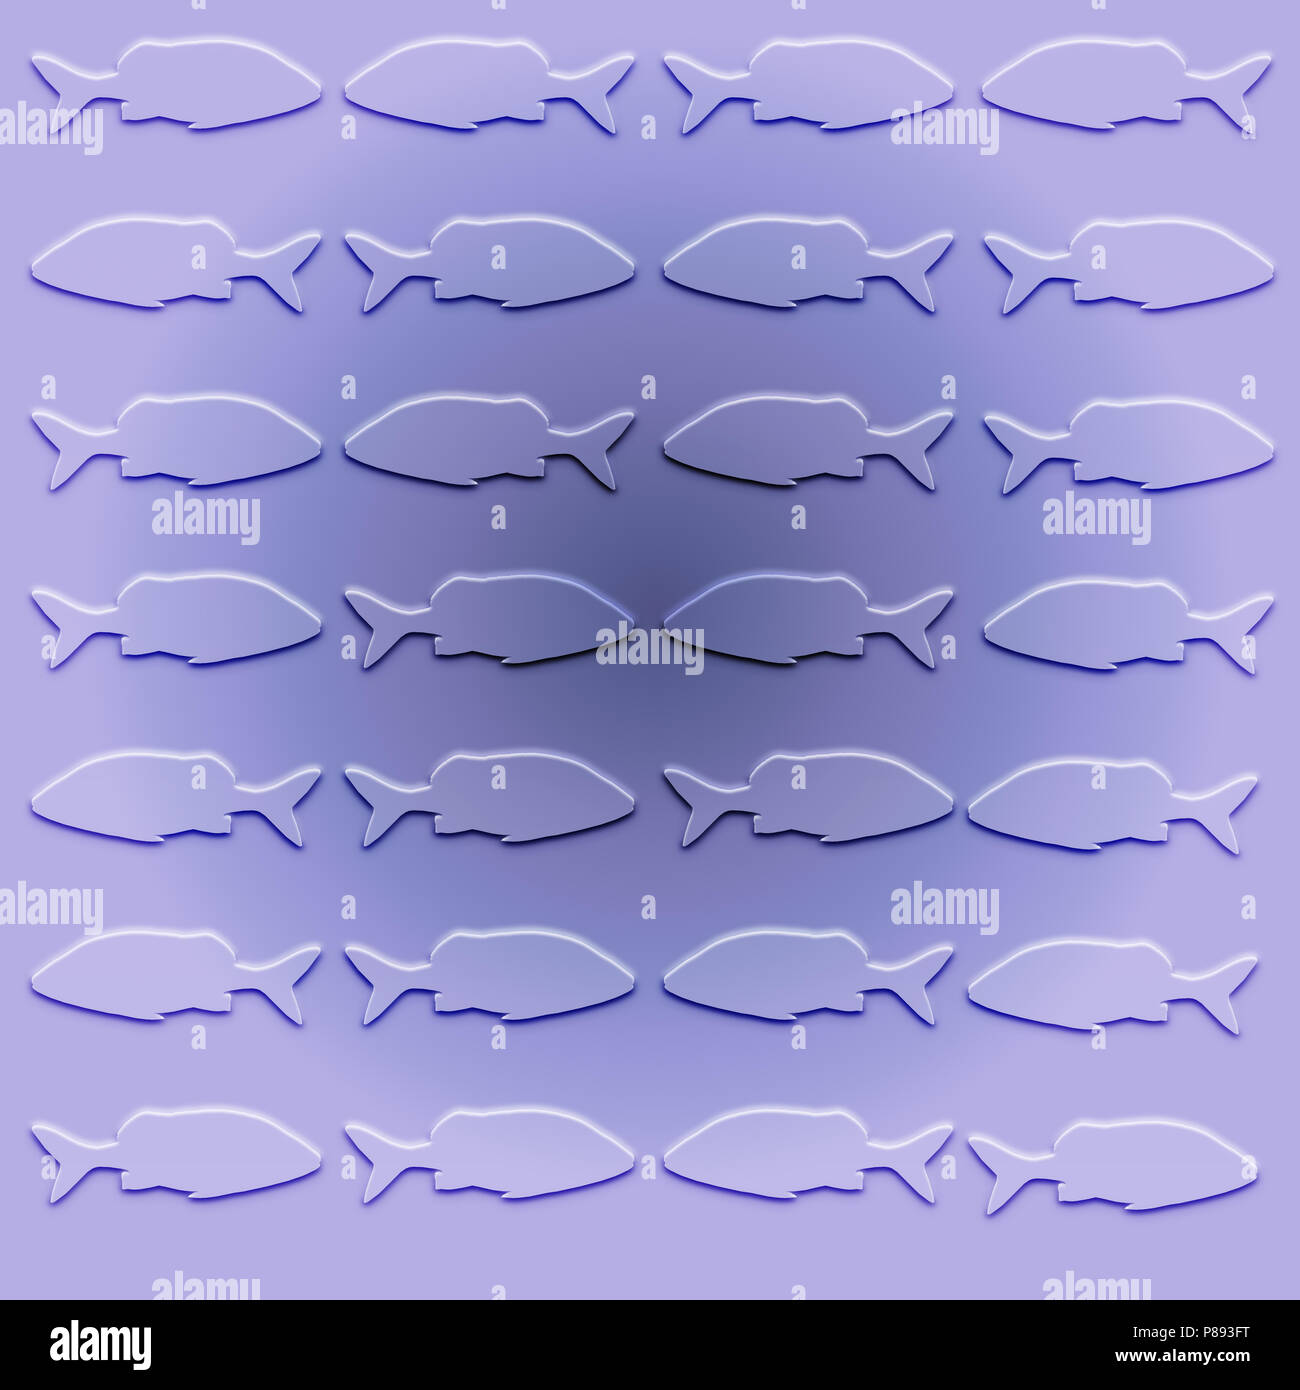 Digitally enhanced image of 28 outlined variations of a sea fish Stock Photo